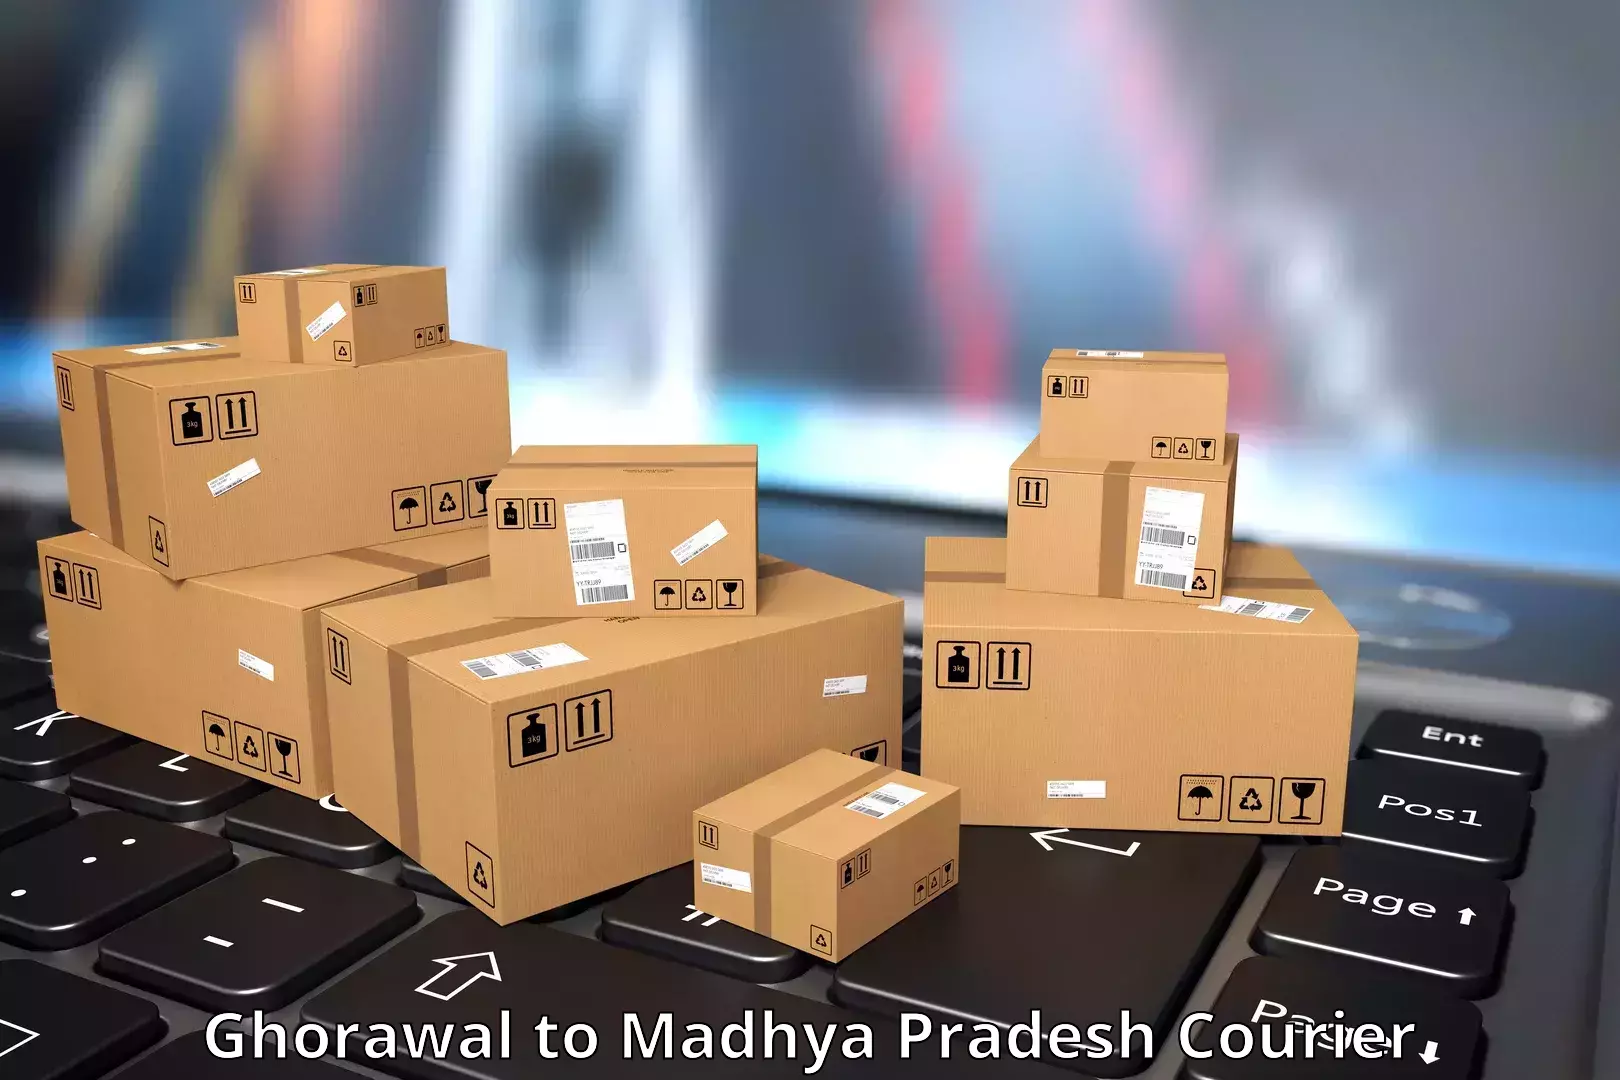 State-of-the-art courier technology Ghorawal to Chanderi